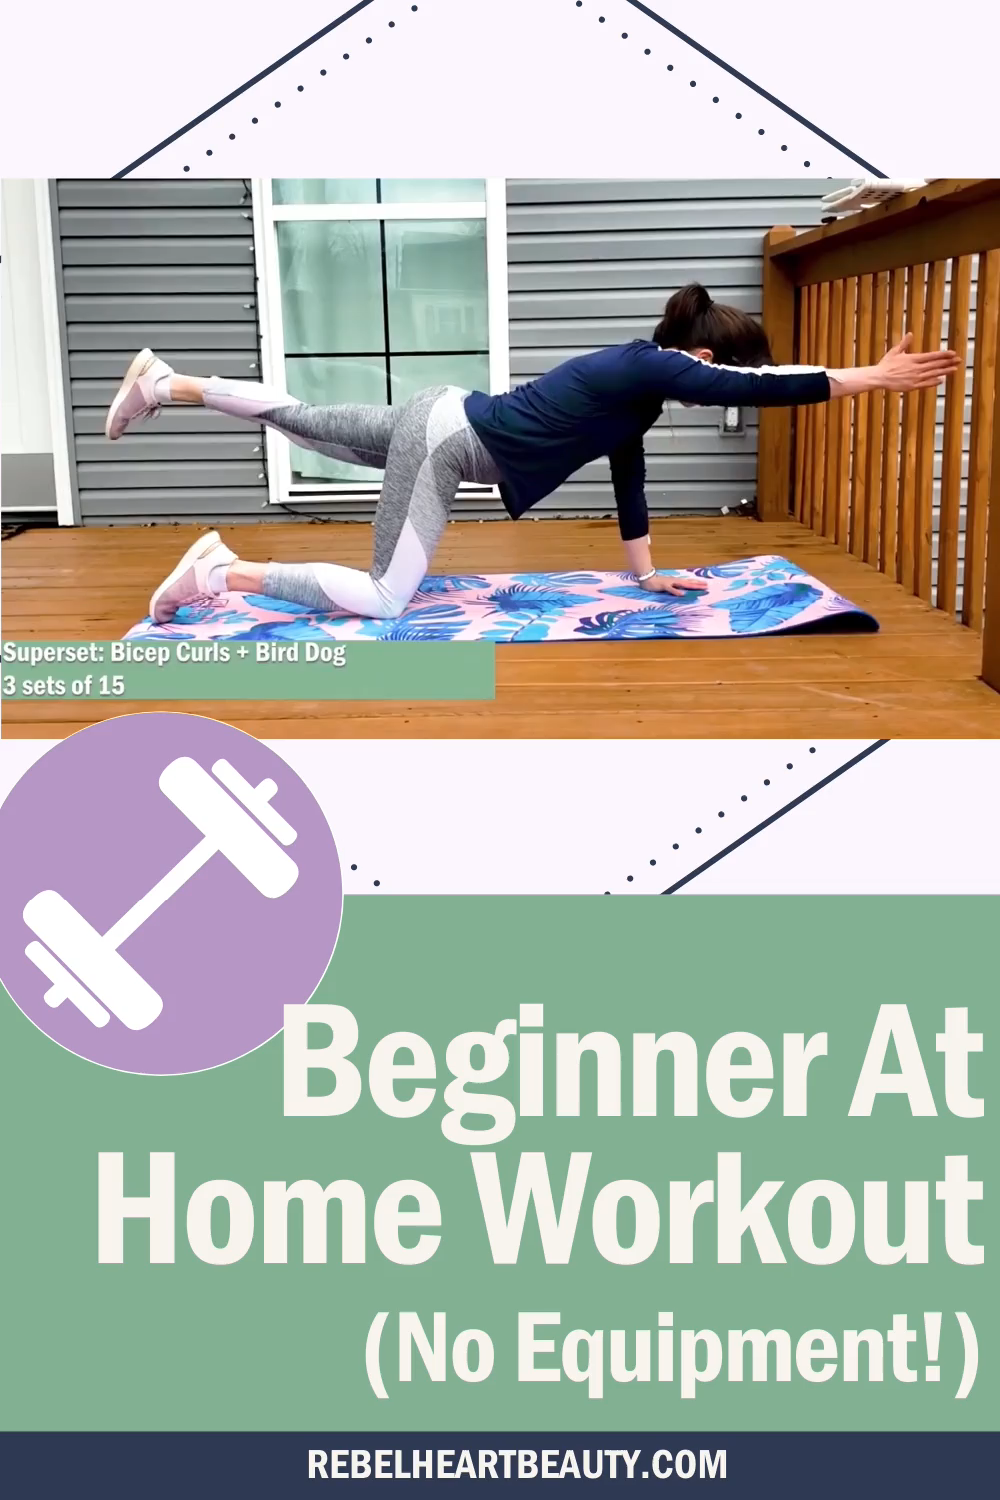 Full body workout at home for beginners - Full body workout at home for beginners -   18 health and fitness For Beginners ideas